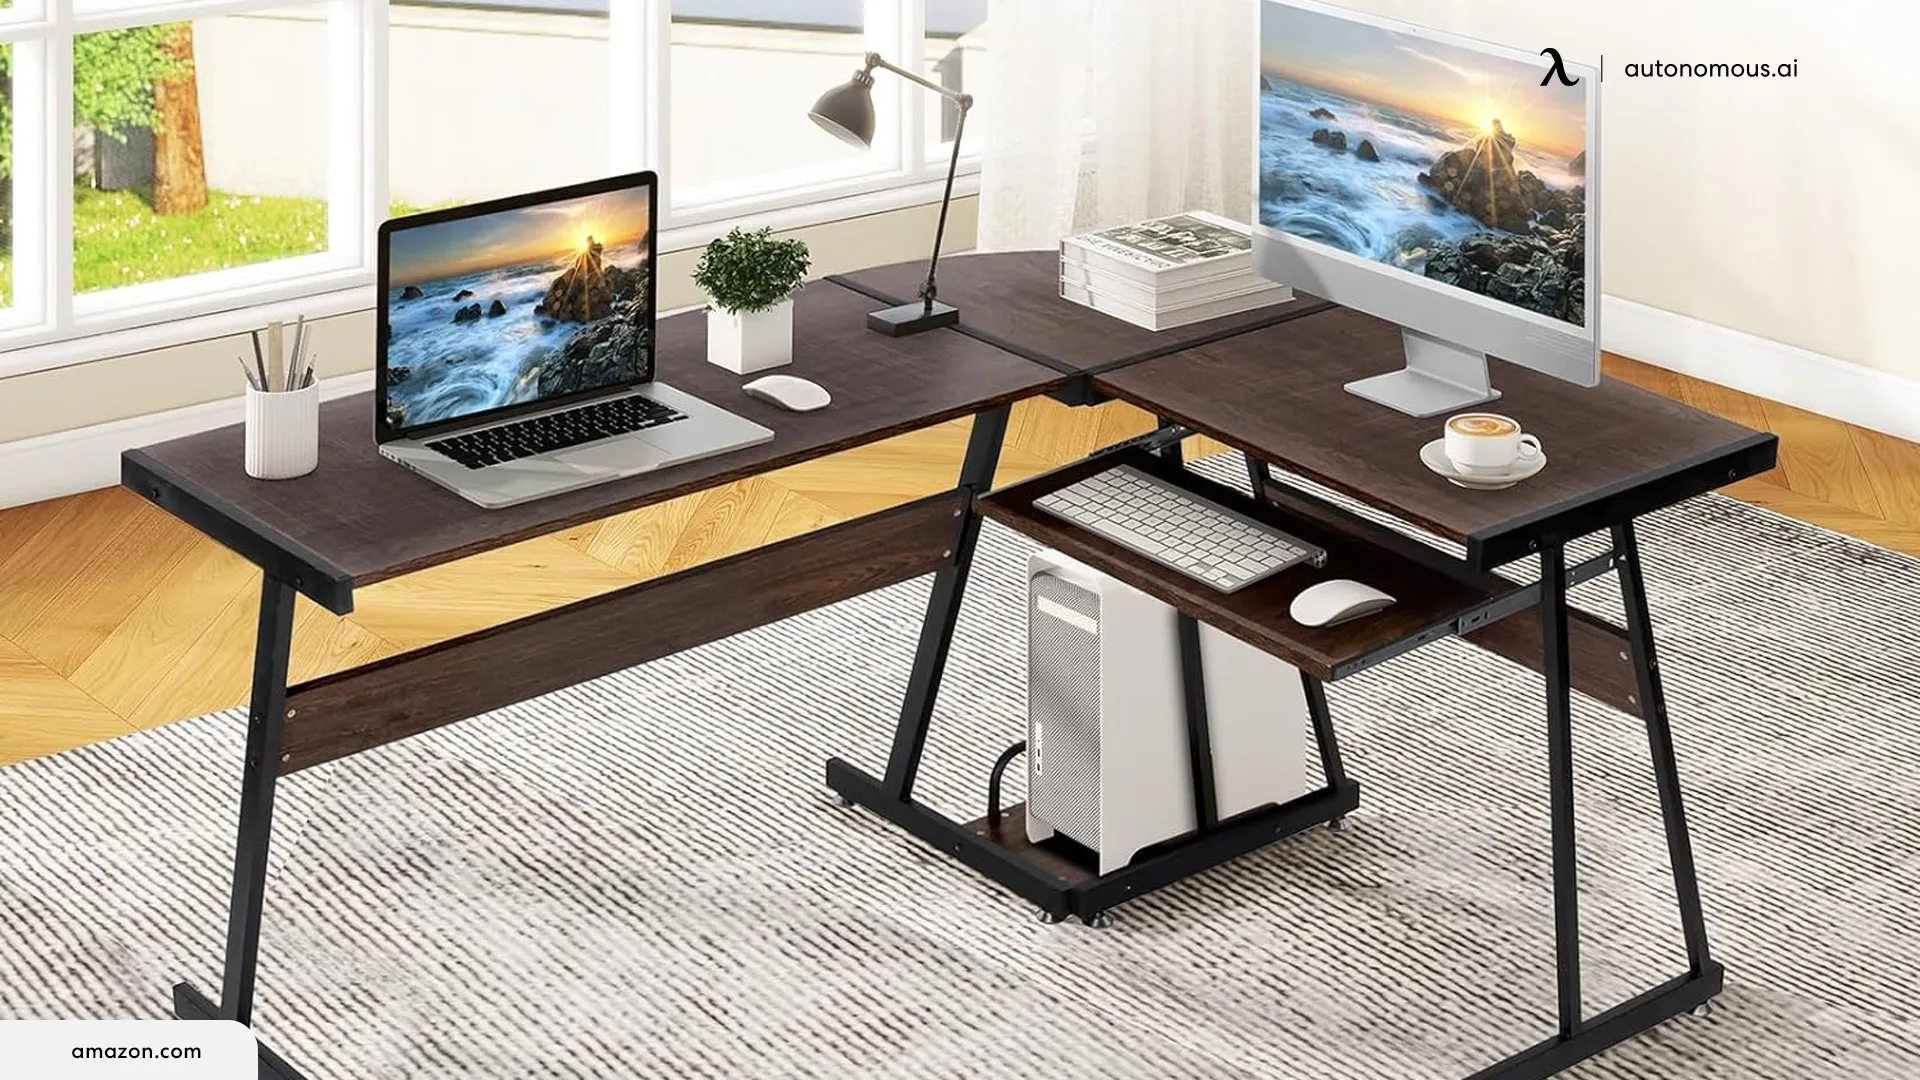 Go for an L-shaped Desk